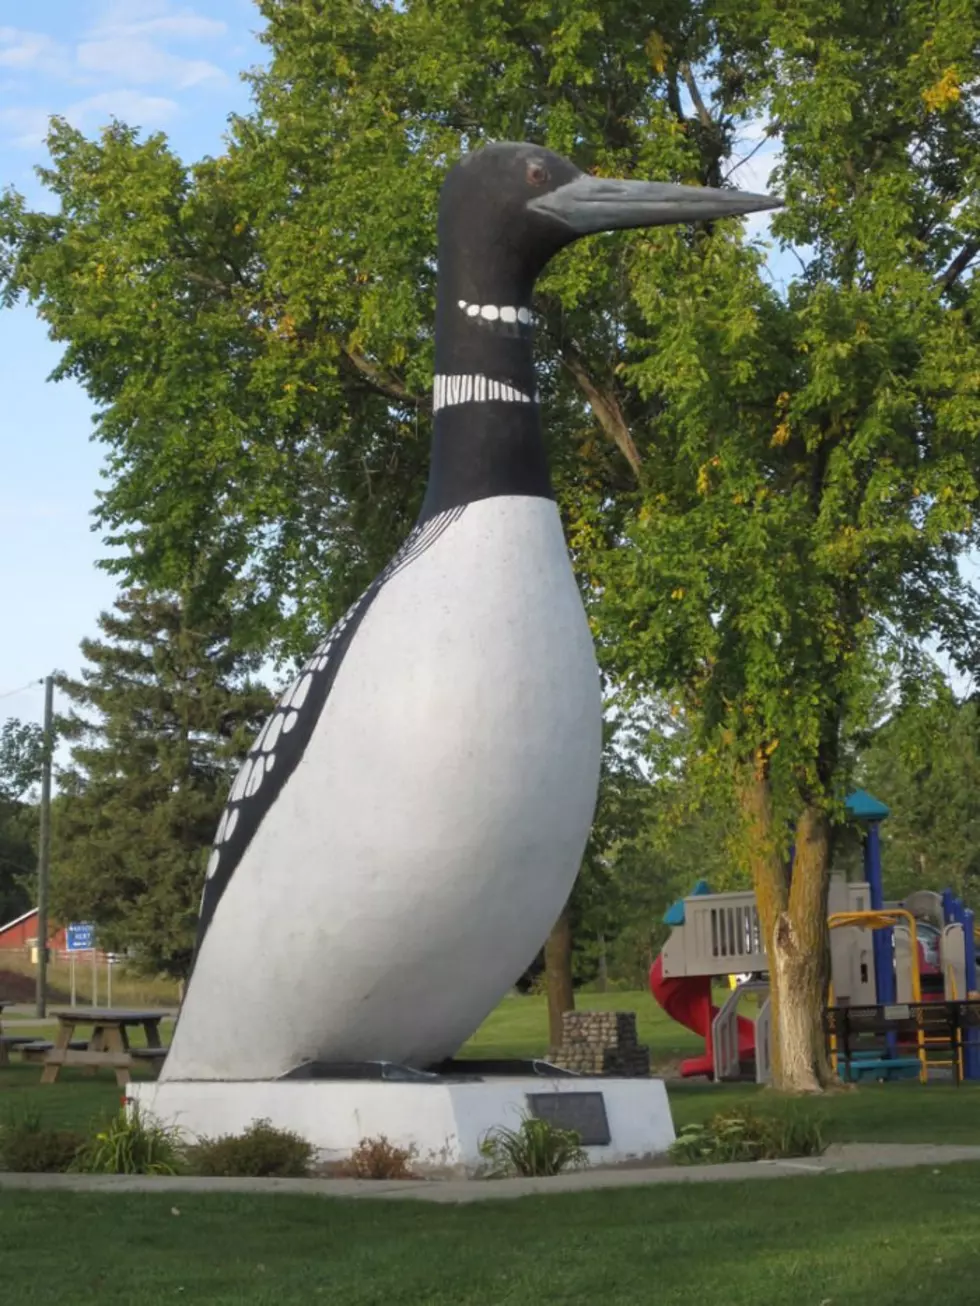 Hit The Road This Summer And See These 10 Uniquely Minnesota Roadside Attractions!